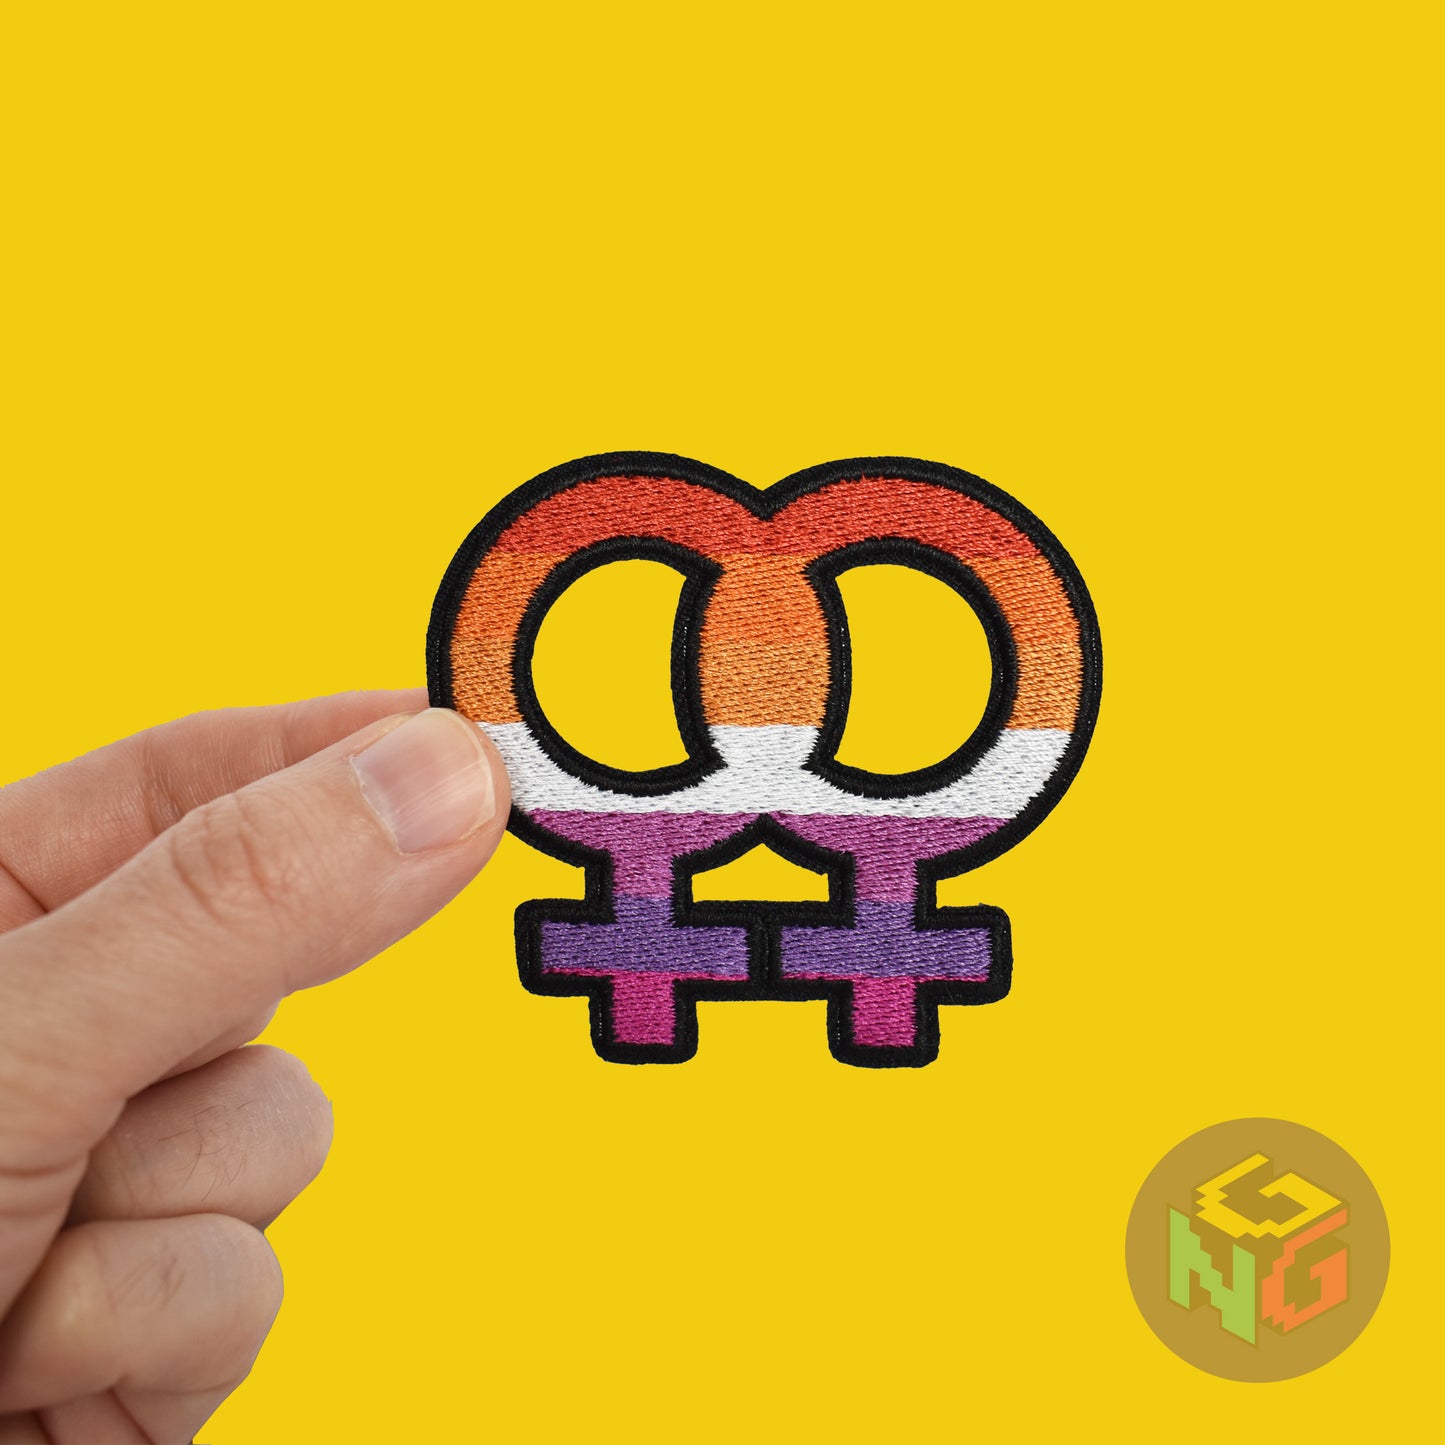 lesbian iron on patch being held in a hand in front of a yellow background